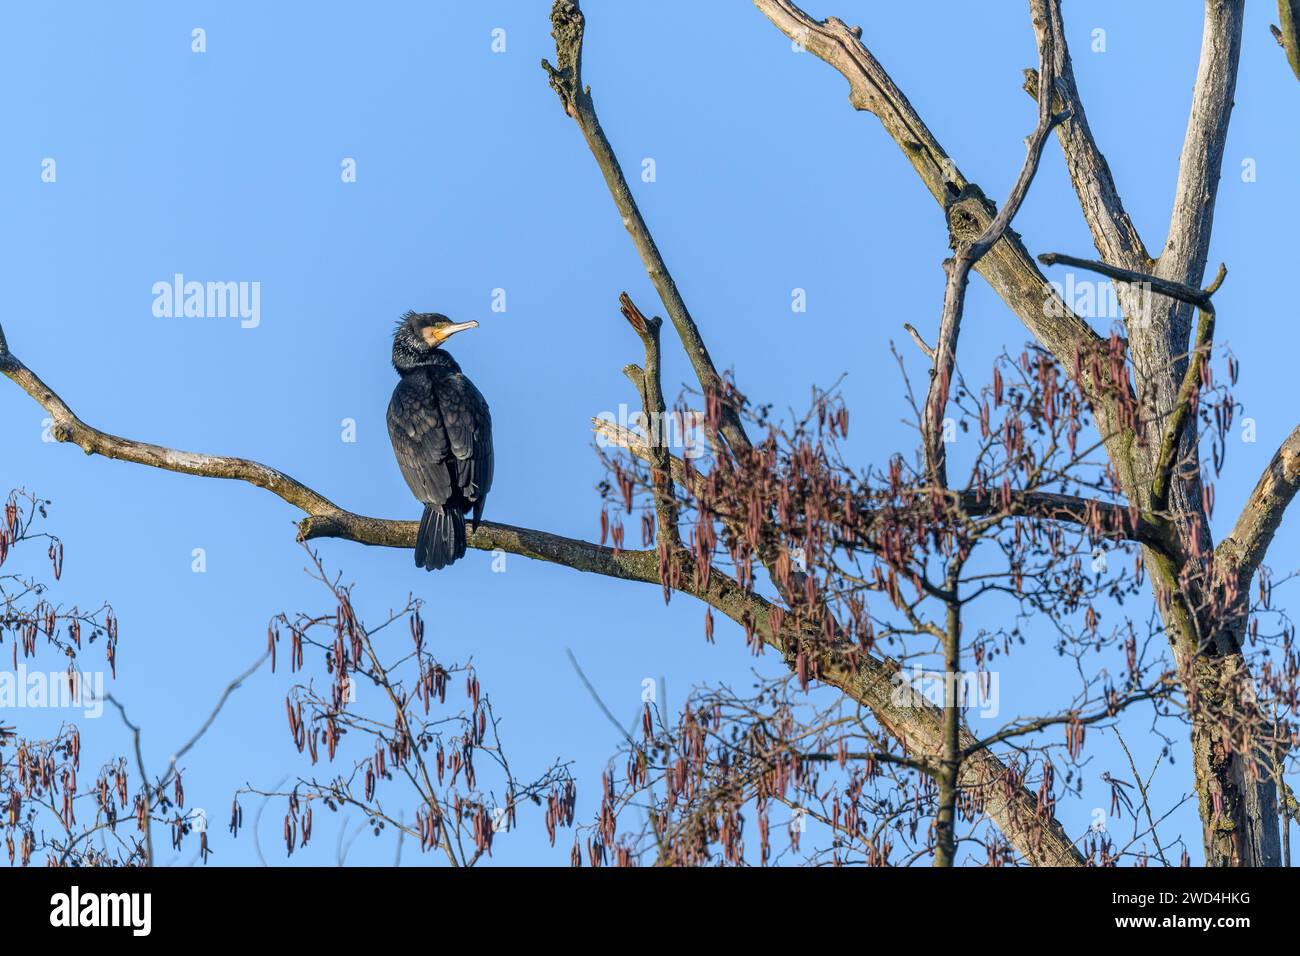 Great cormorant (Phalacrocorax carbo) perched in a tree in winters. Bas-Rhin, Alsace,Grand Est, France, Europe. Stock Photo